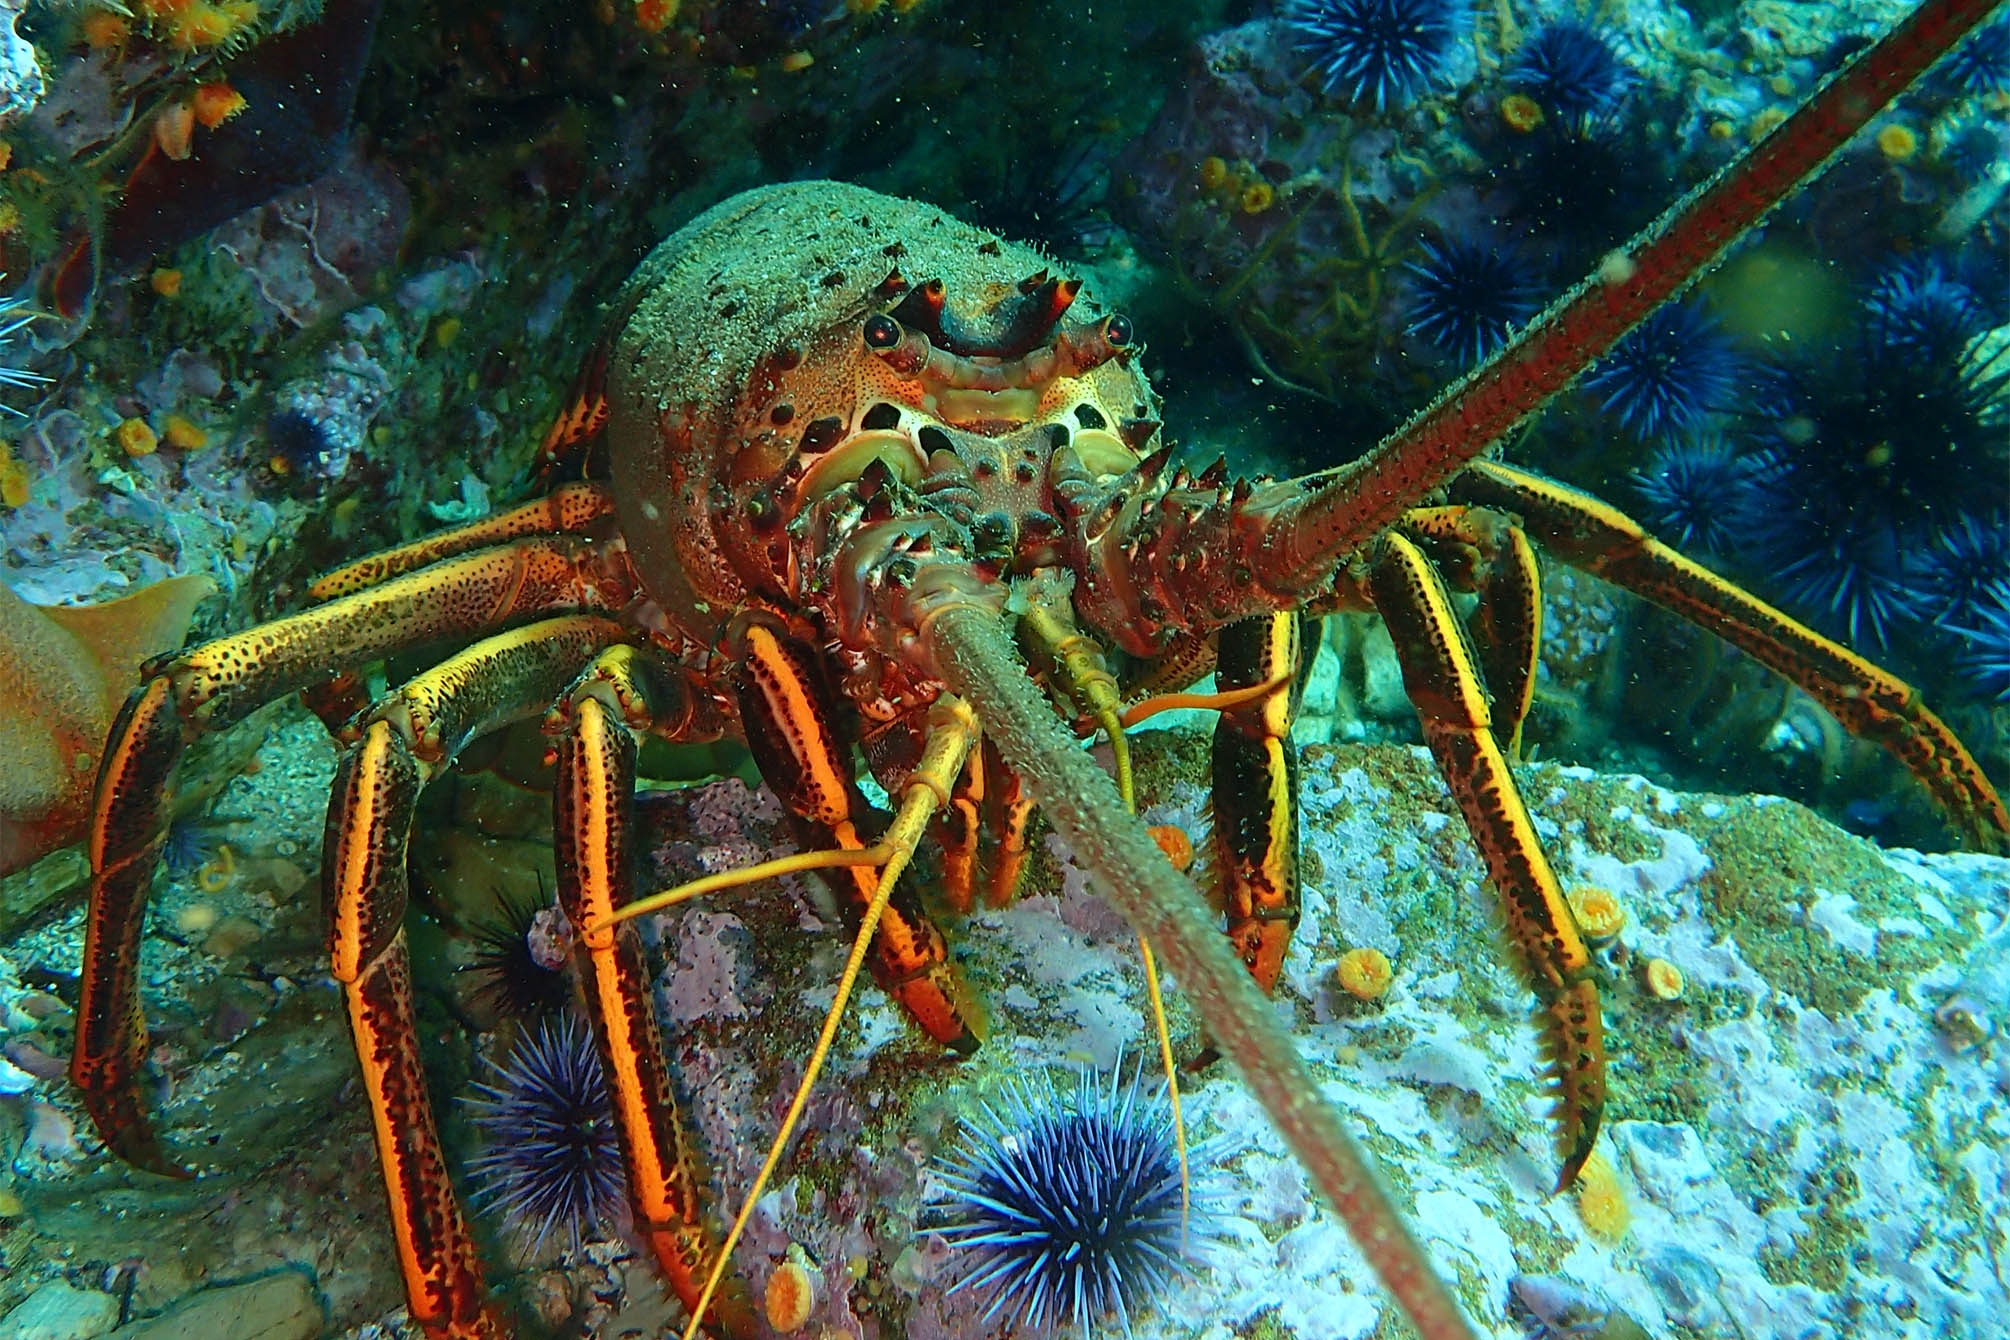 Closeup of a lobster perched on a rock underwater